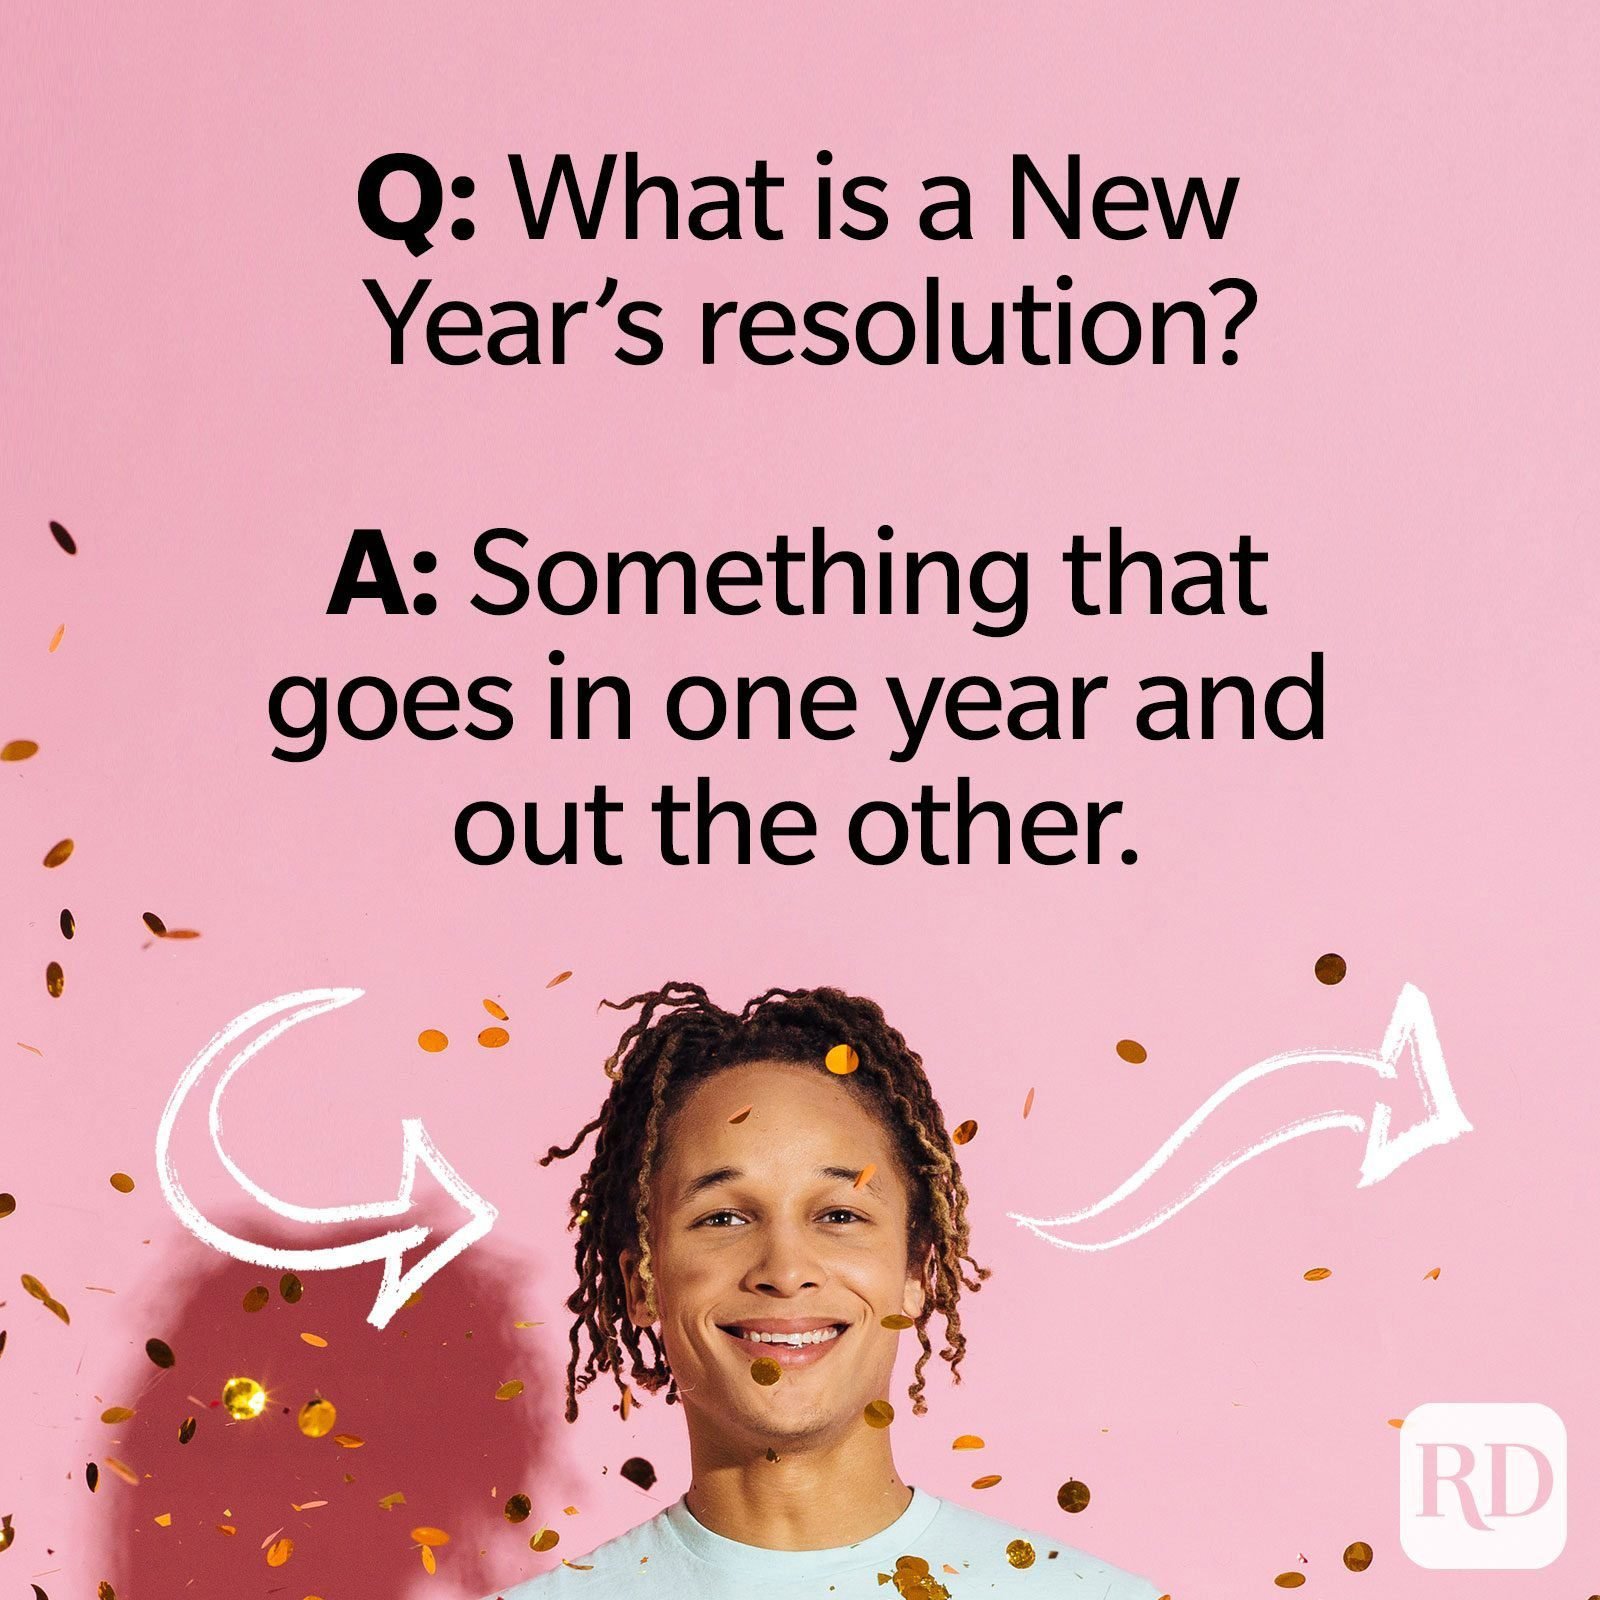 what is a New Years resolution joke